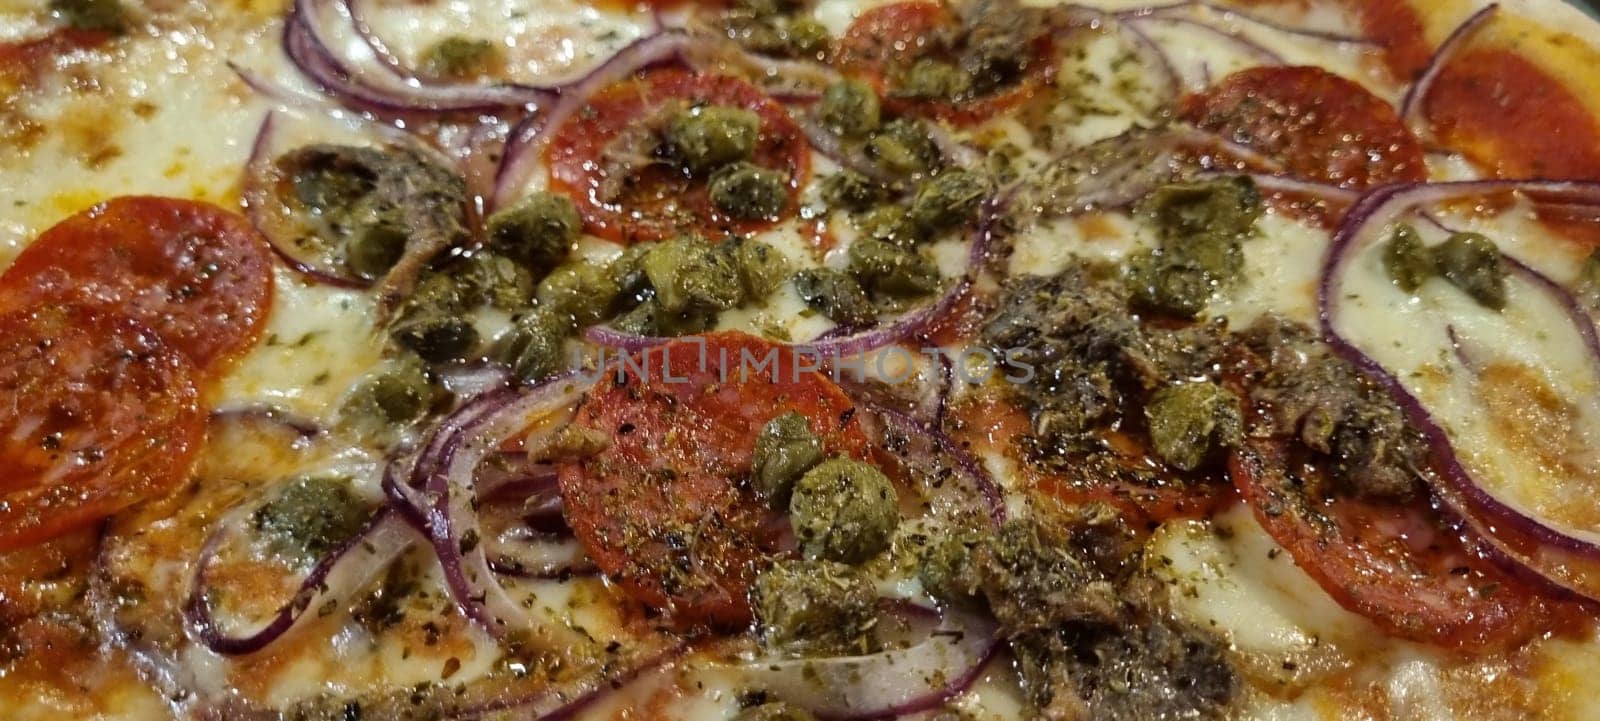 Close-up of a delicious gourmet italian pizza with cheese. Tomatoes. Onions. And olives. Freshly made and baked. Showcasing the traditional homemade dough and flavorful pizza toppings